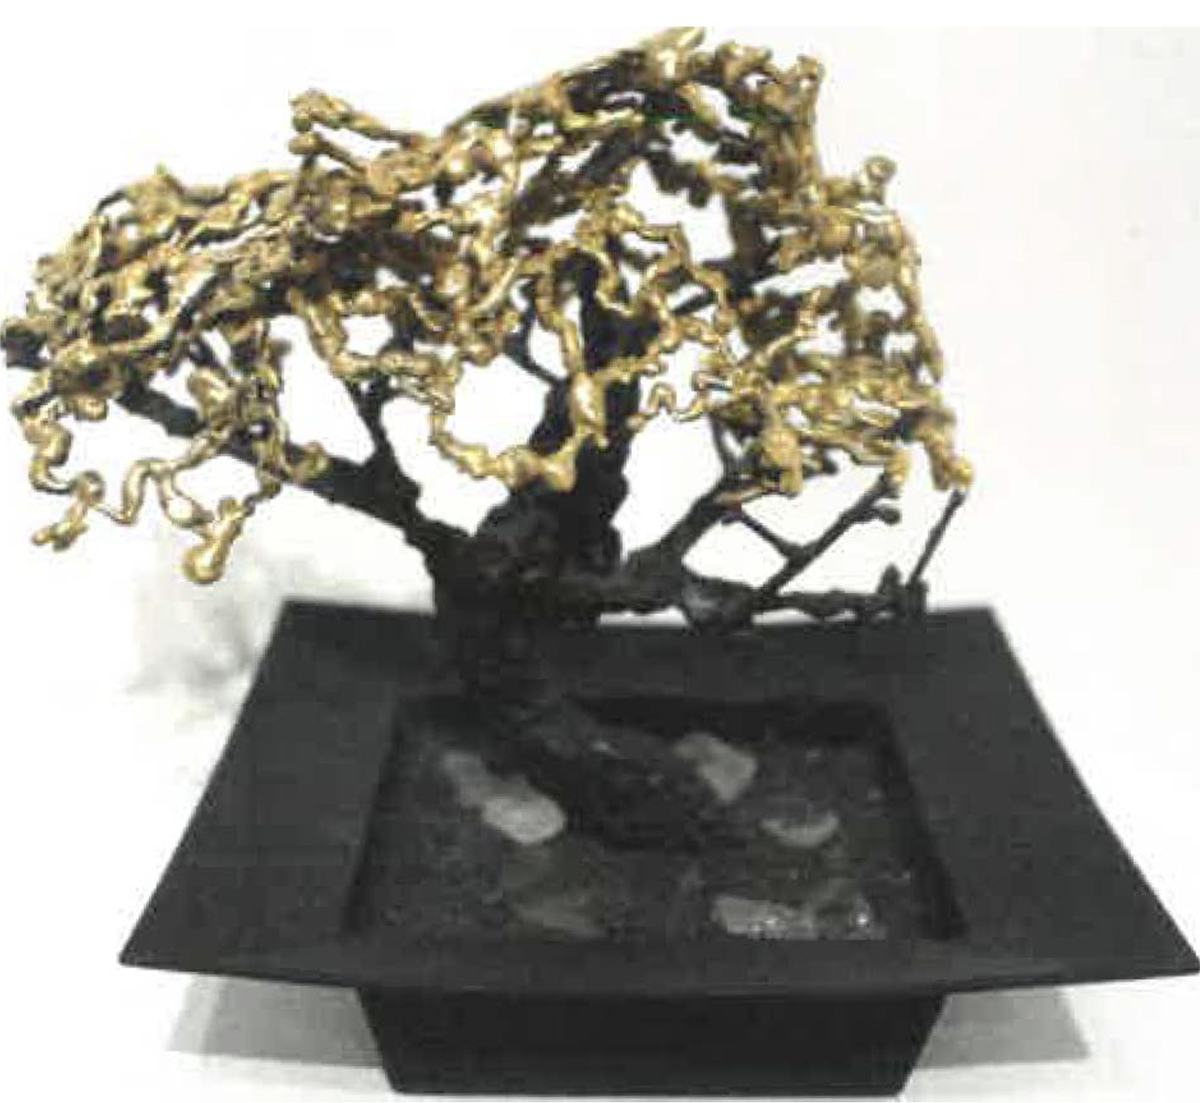 Sculpted bonsai tree with brass leaves. Image courtesy of Naomi Hutchquist